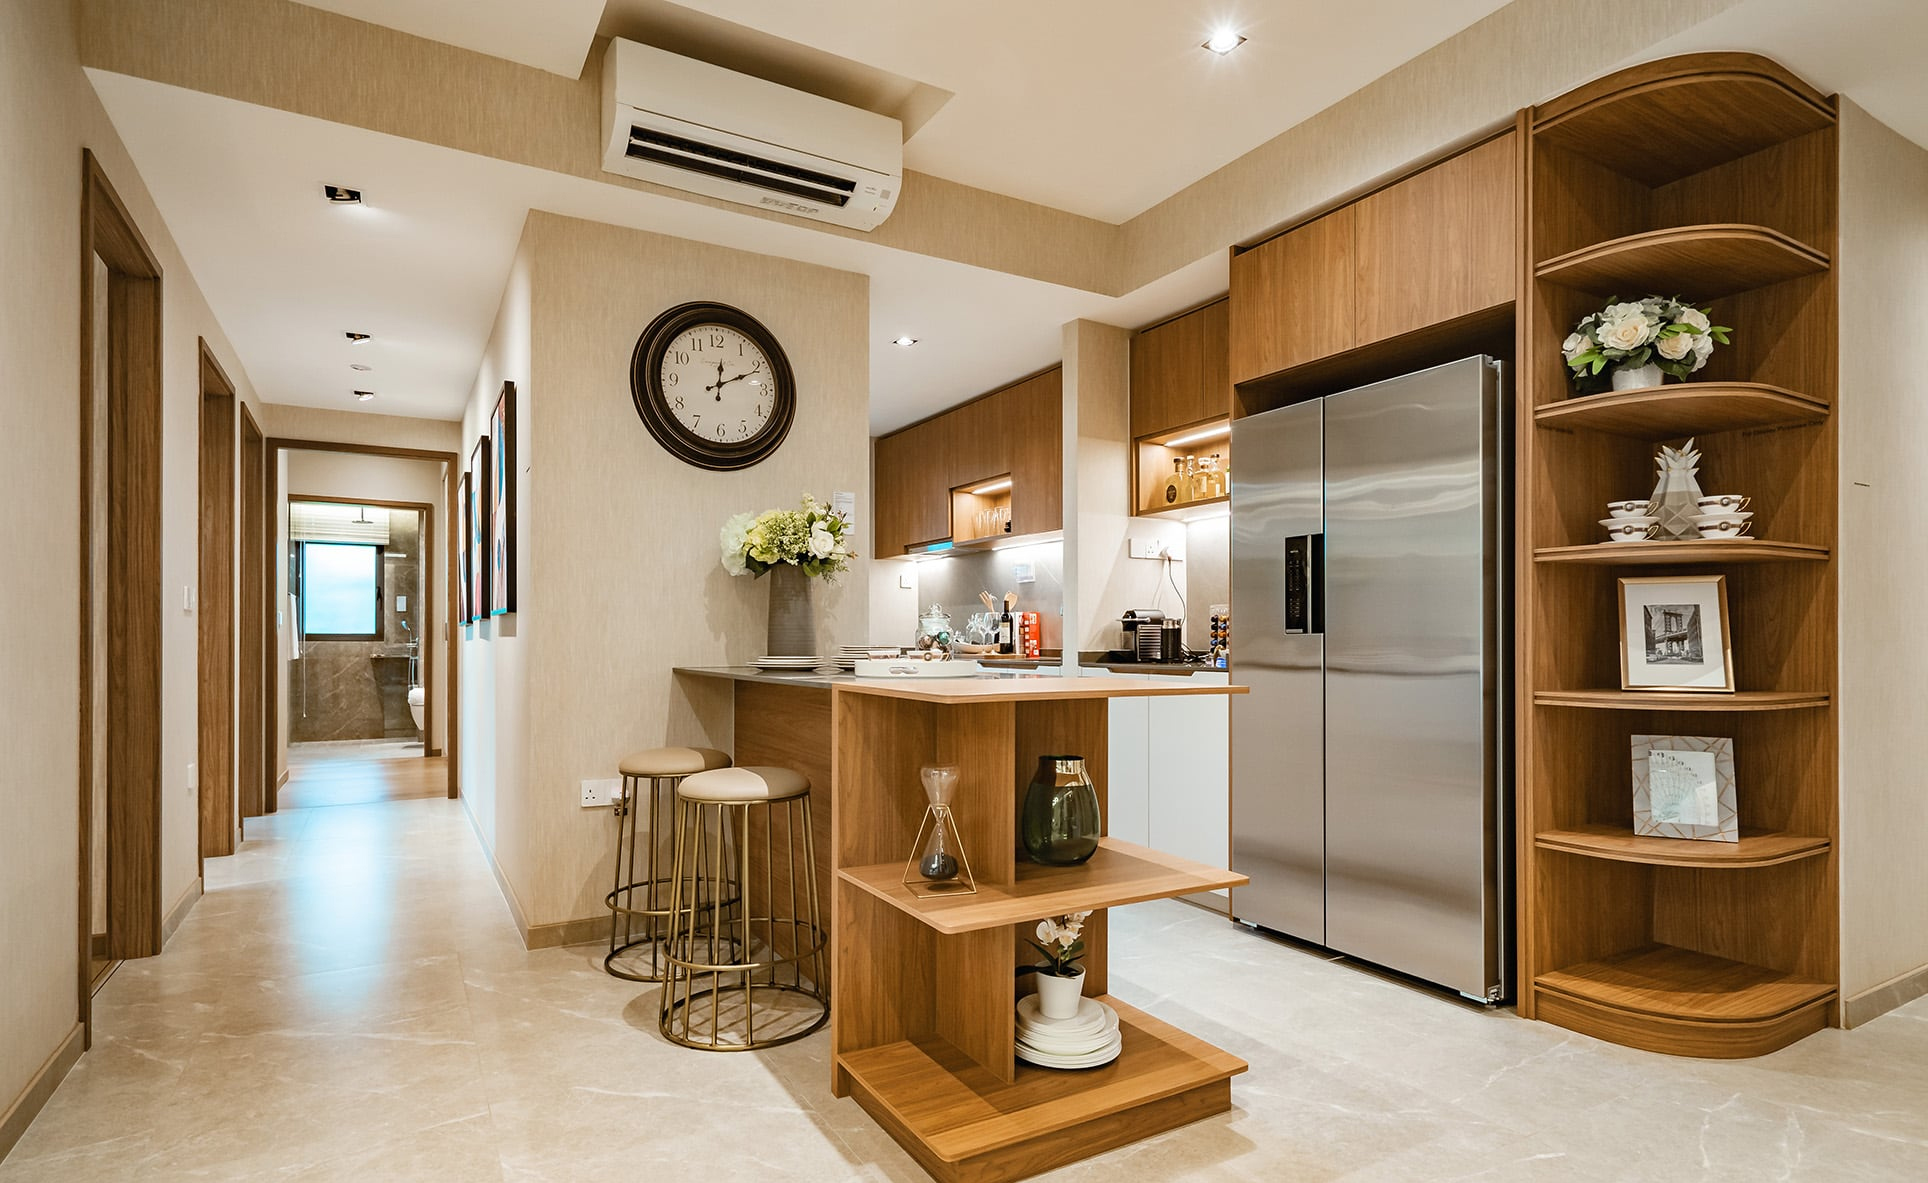 After the price cuts, Myra Condo's 474 sq ft one-bedroom units will be sold at a median price of S$1.41 million.